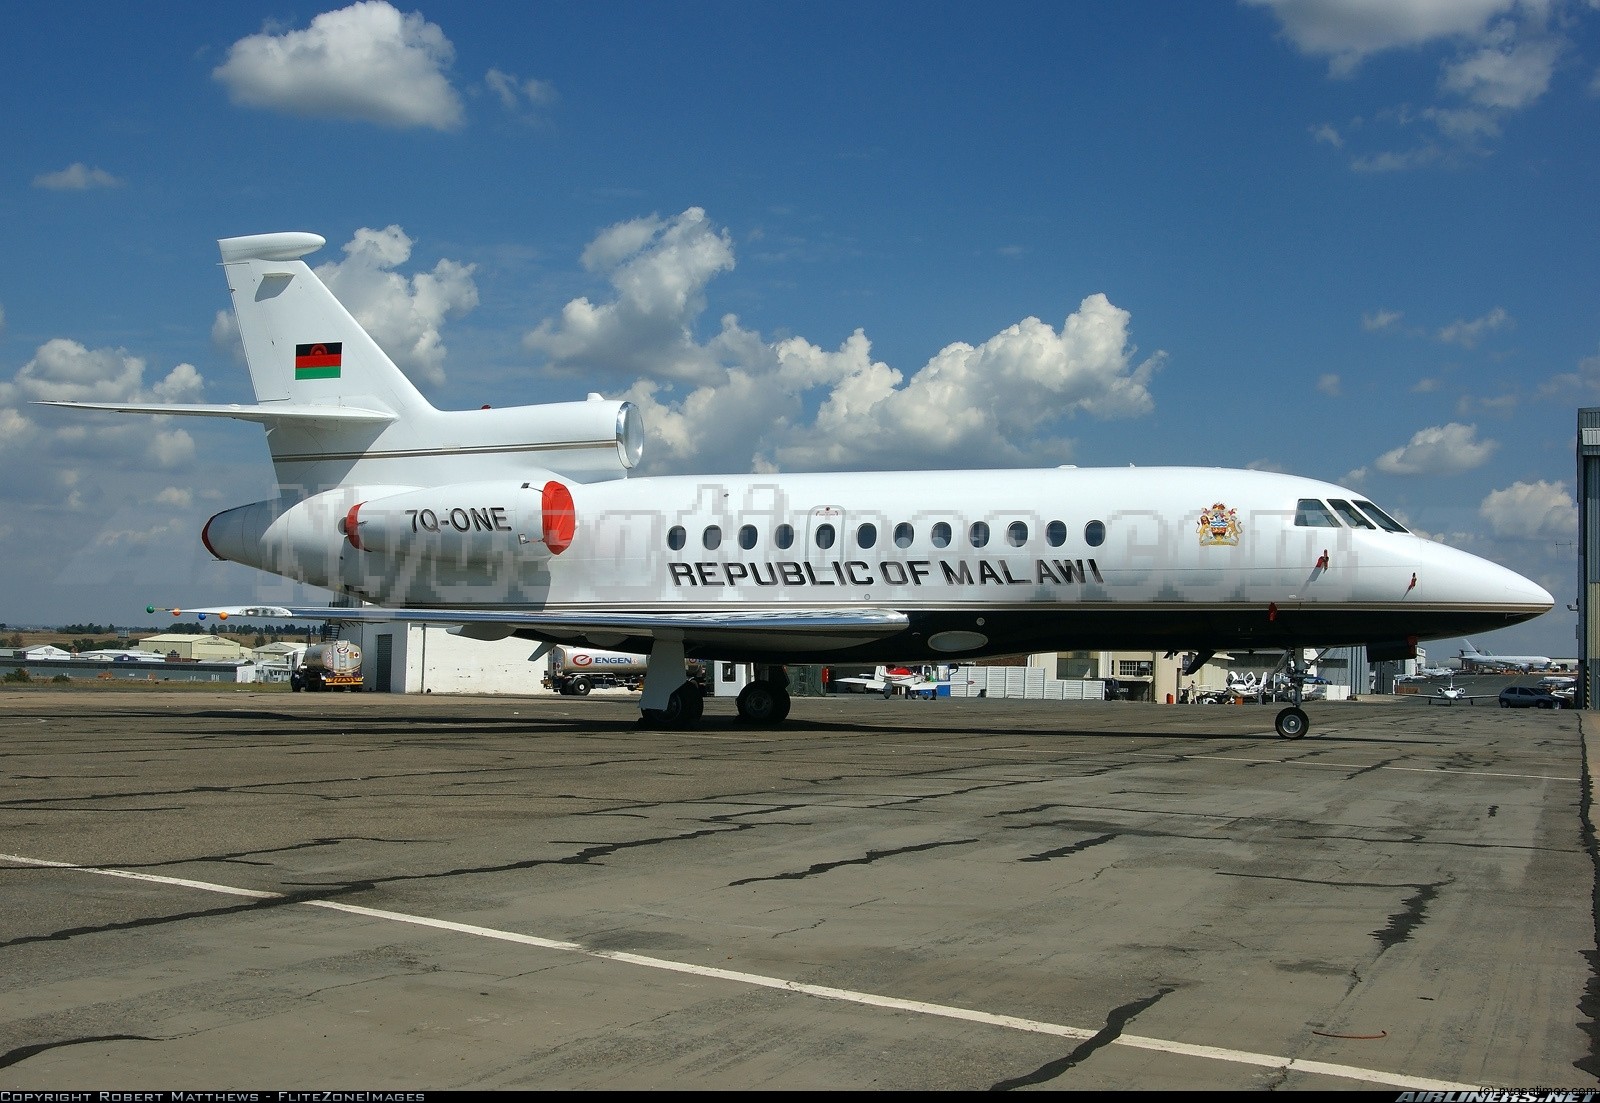 Malawi Presidential jet up for sale